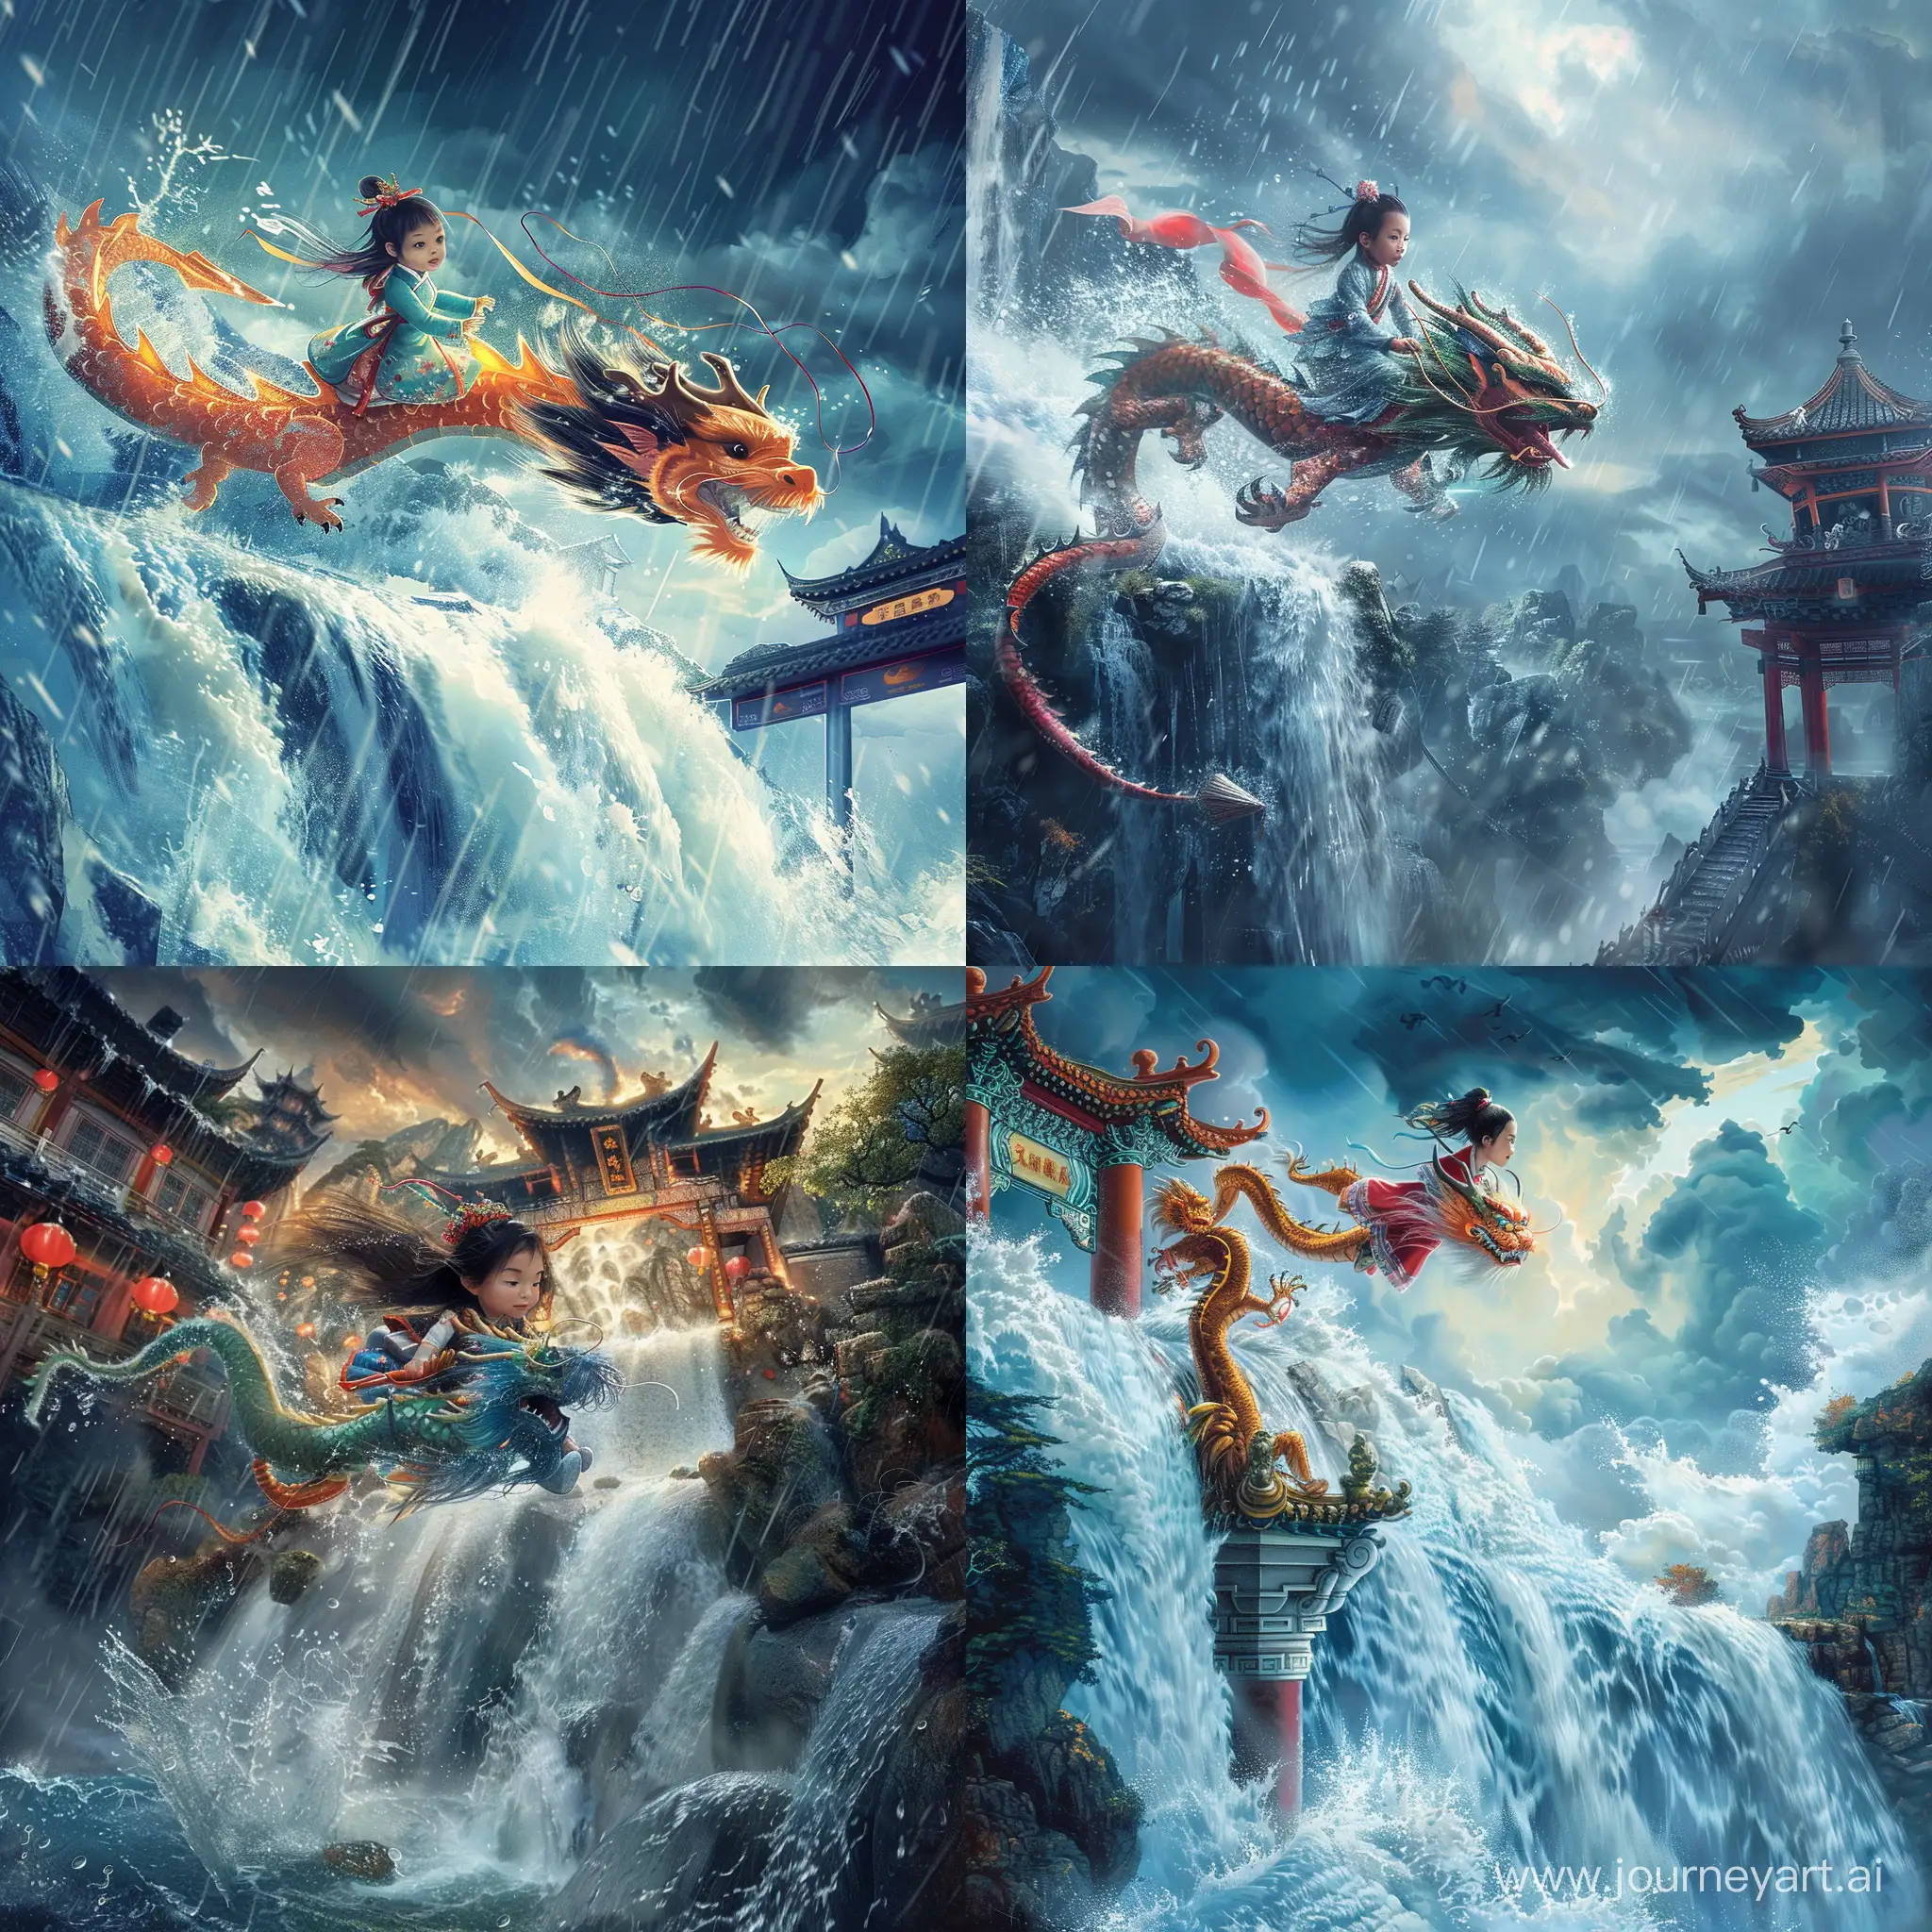 A little Chinese girl rides a Chinese dragon and flies over the waterfall towards the dragon gate in the stormy college weather